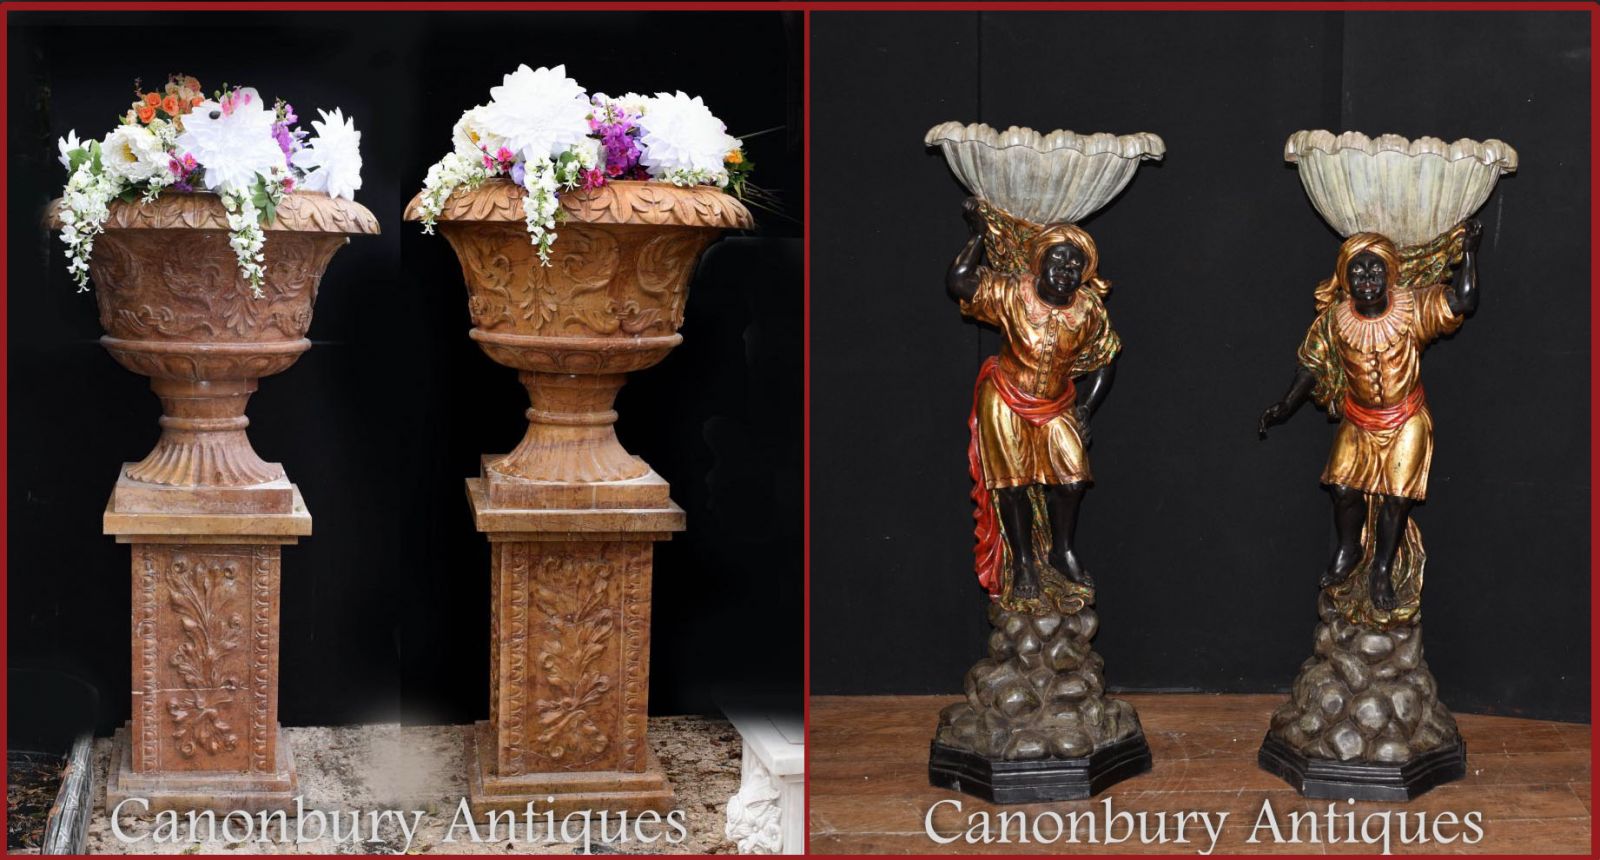 Come view our Italian antiques